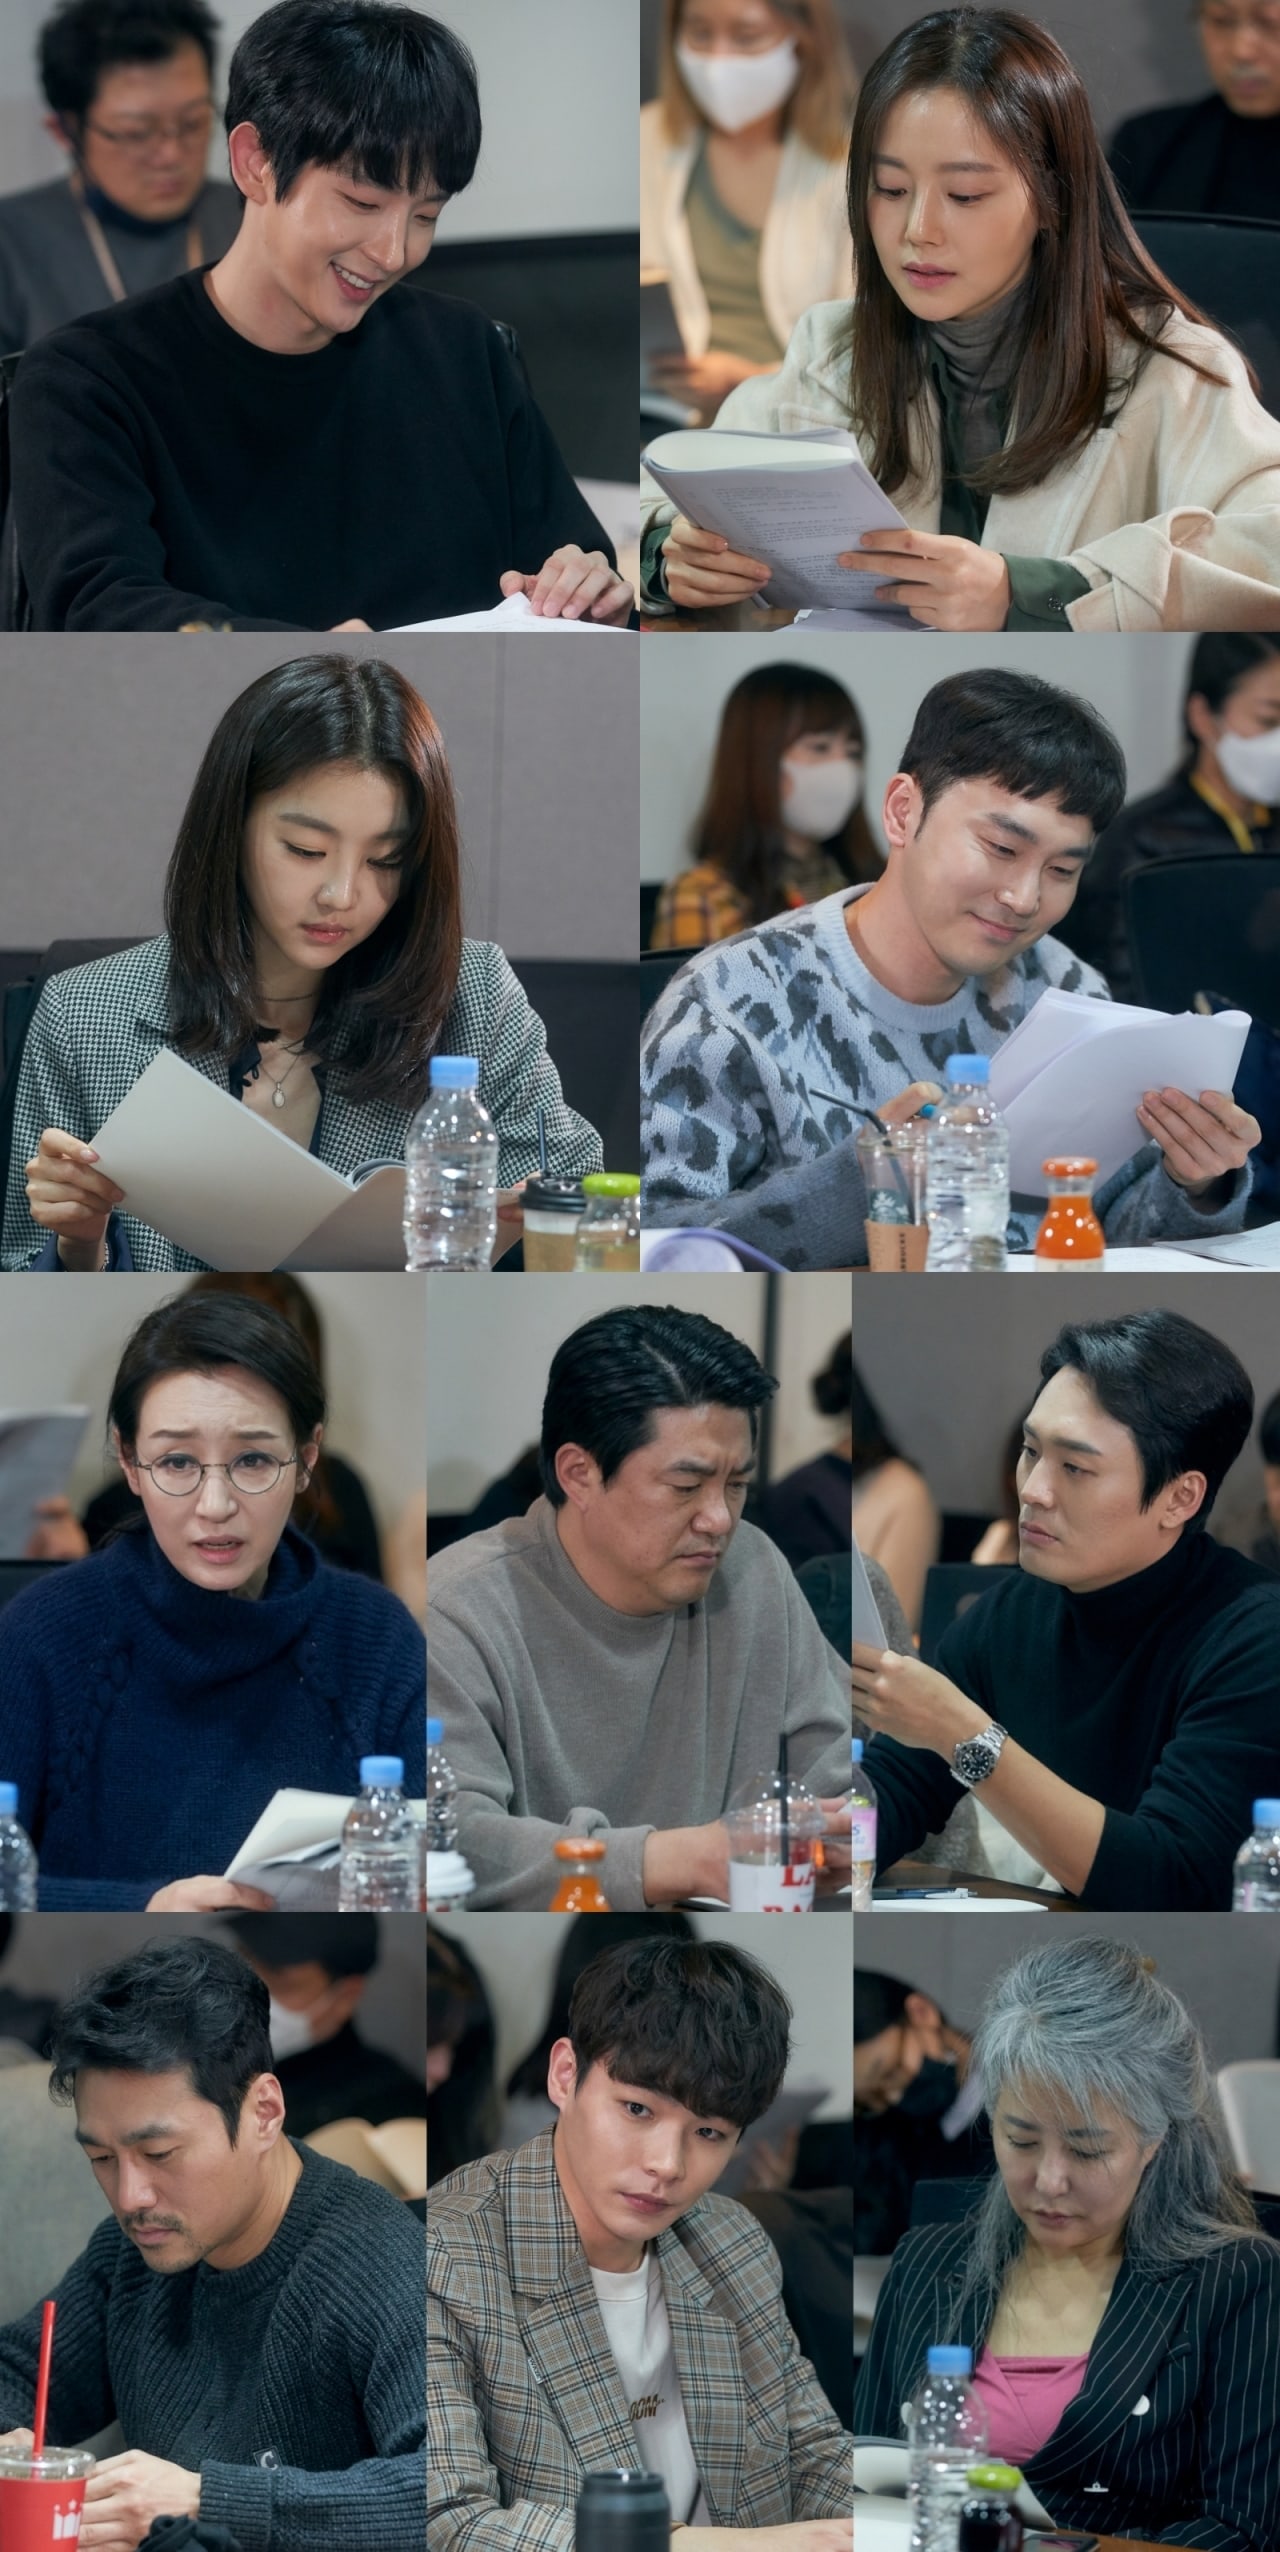 lee-joon-gi-moon-chae-won-and-more-reveal-script-reading-of-upcoming-tvn-thriller-images-1